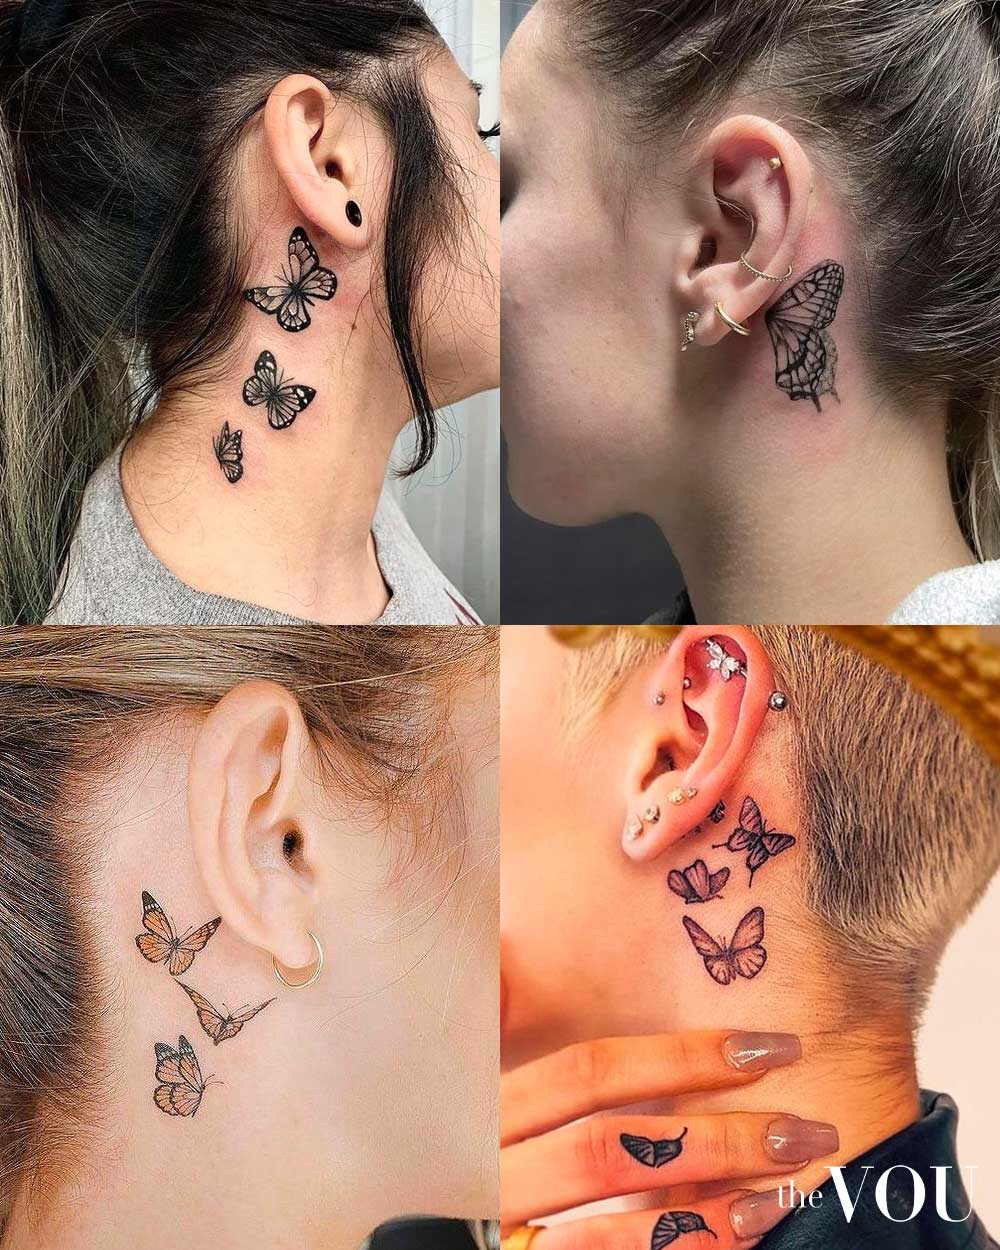 Butterfly Tattoos Behind the Ear